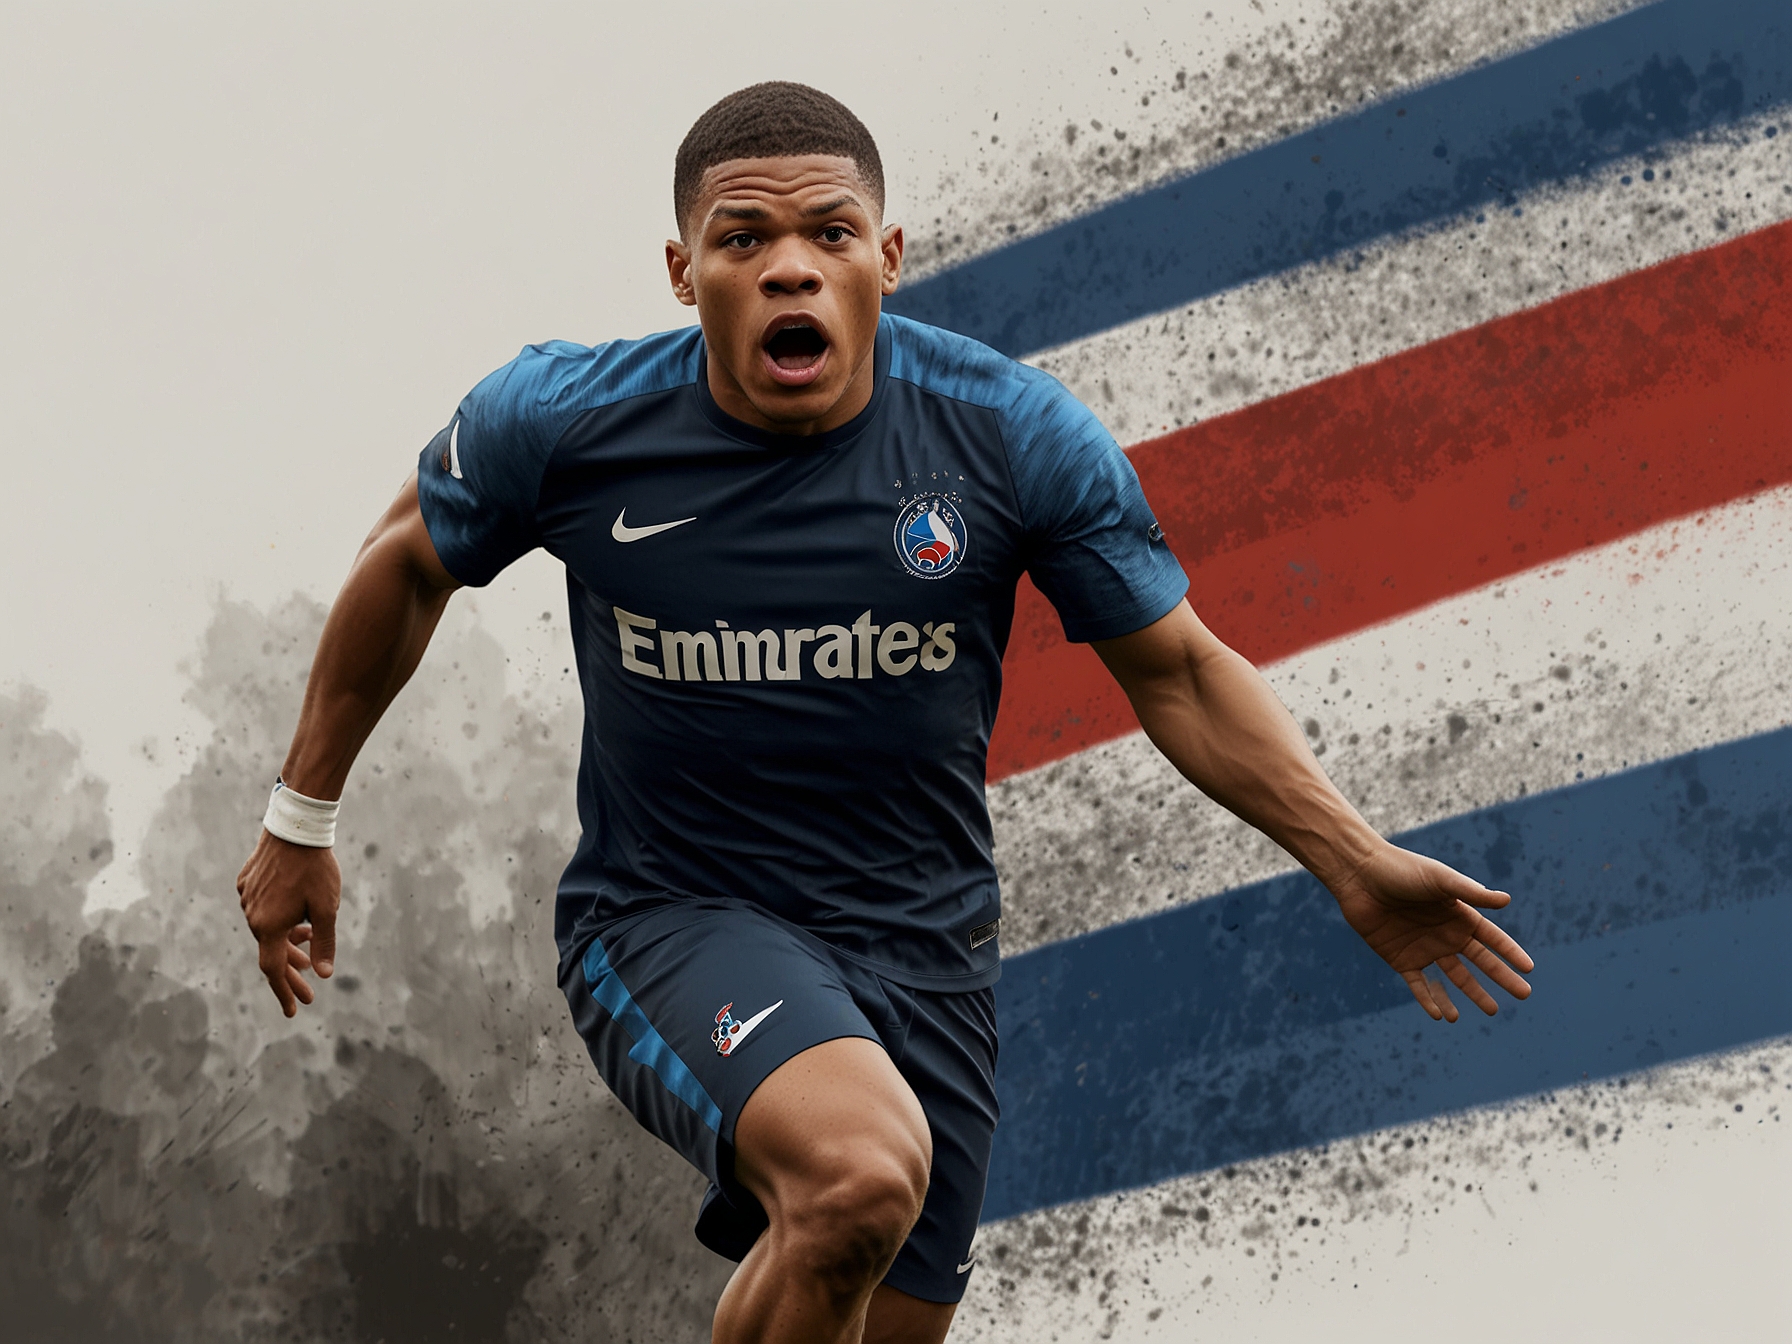 The French football star, Kylian Mbappé, showcases his agility and commitment during a training session, his face adorned with a protective tricolor mask, a symbol of both safety and patriotism.